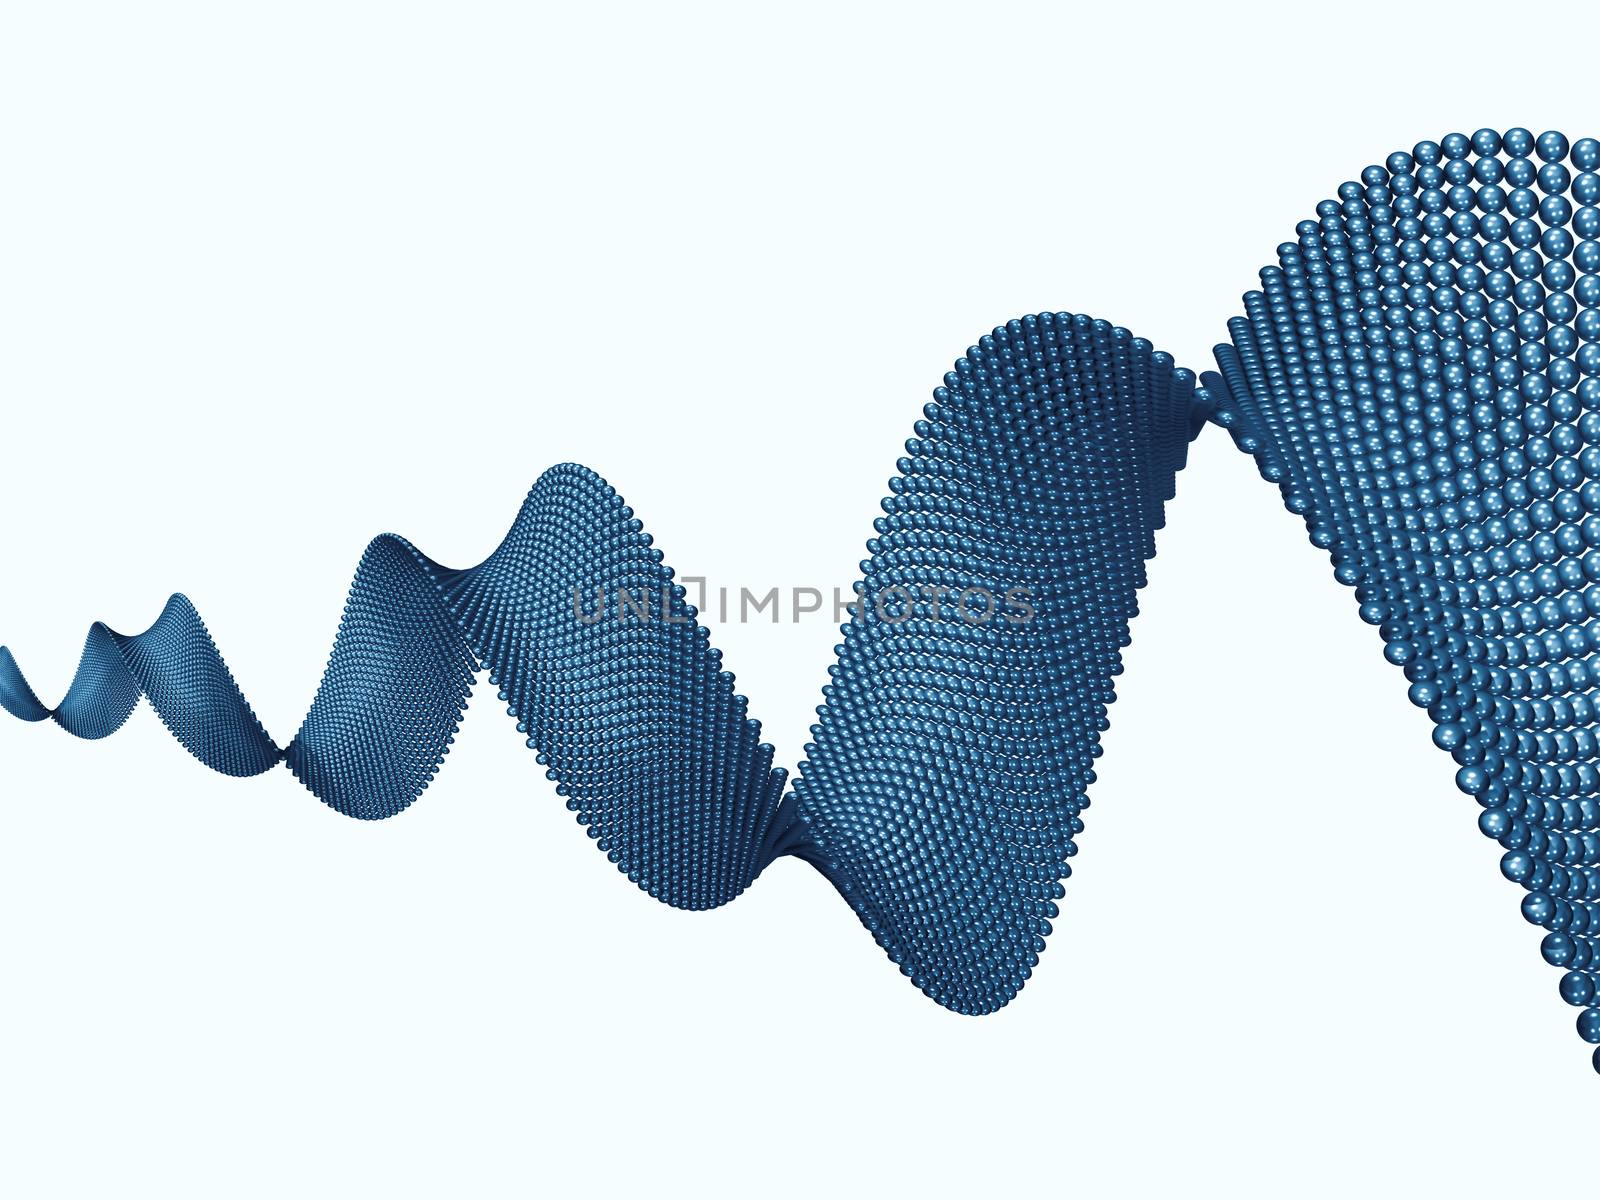 Pure Geometry series. Background of blue spiral elements for your design needs on the subject of industry, science and technology